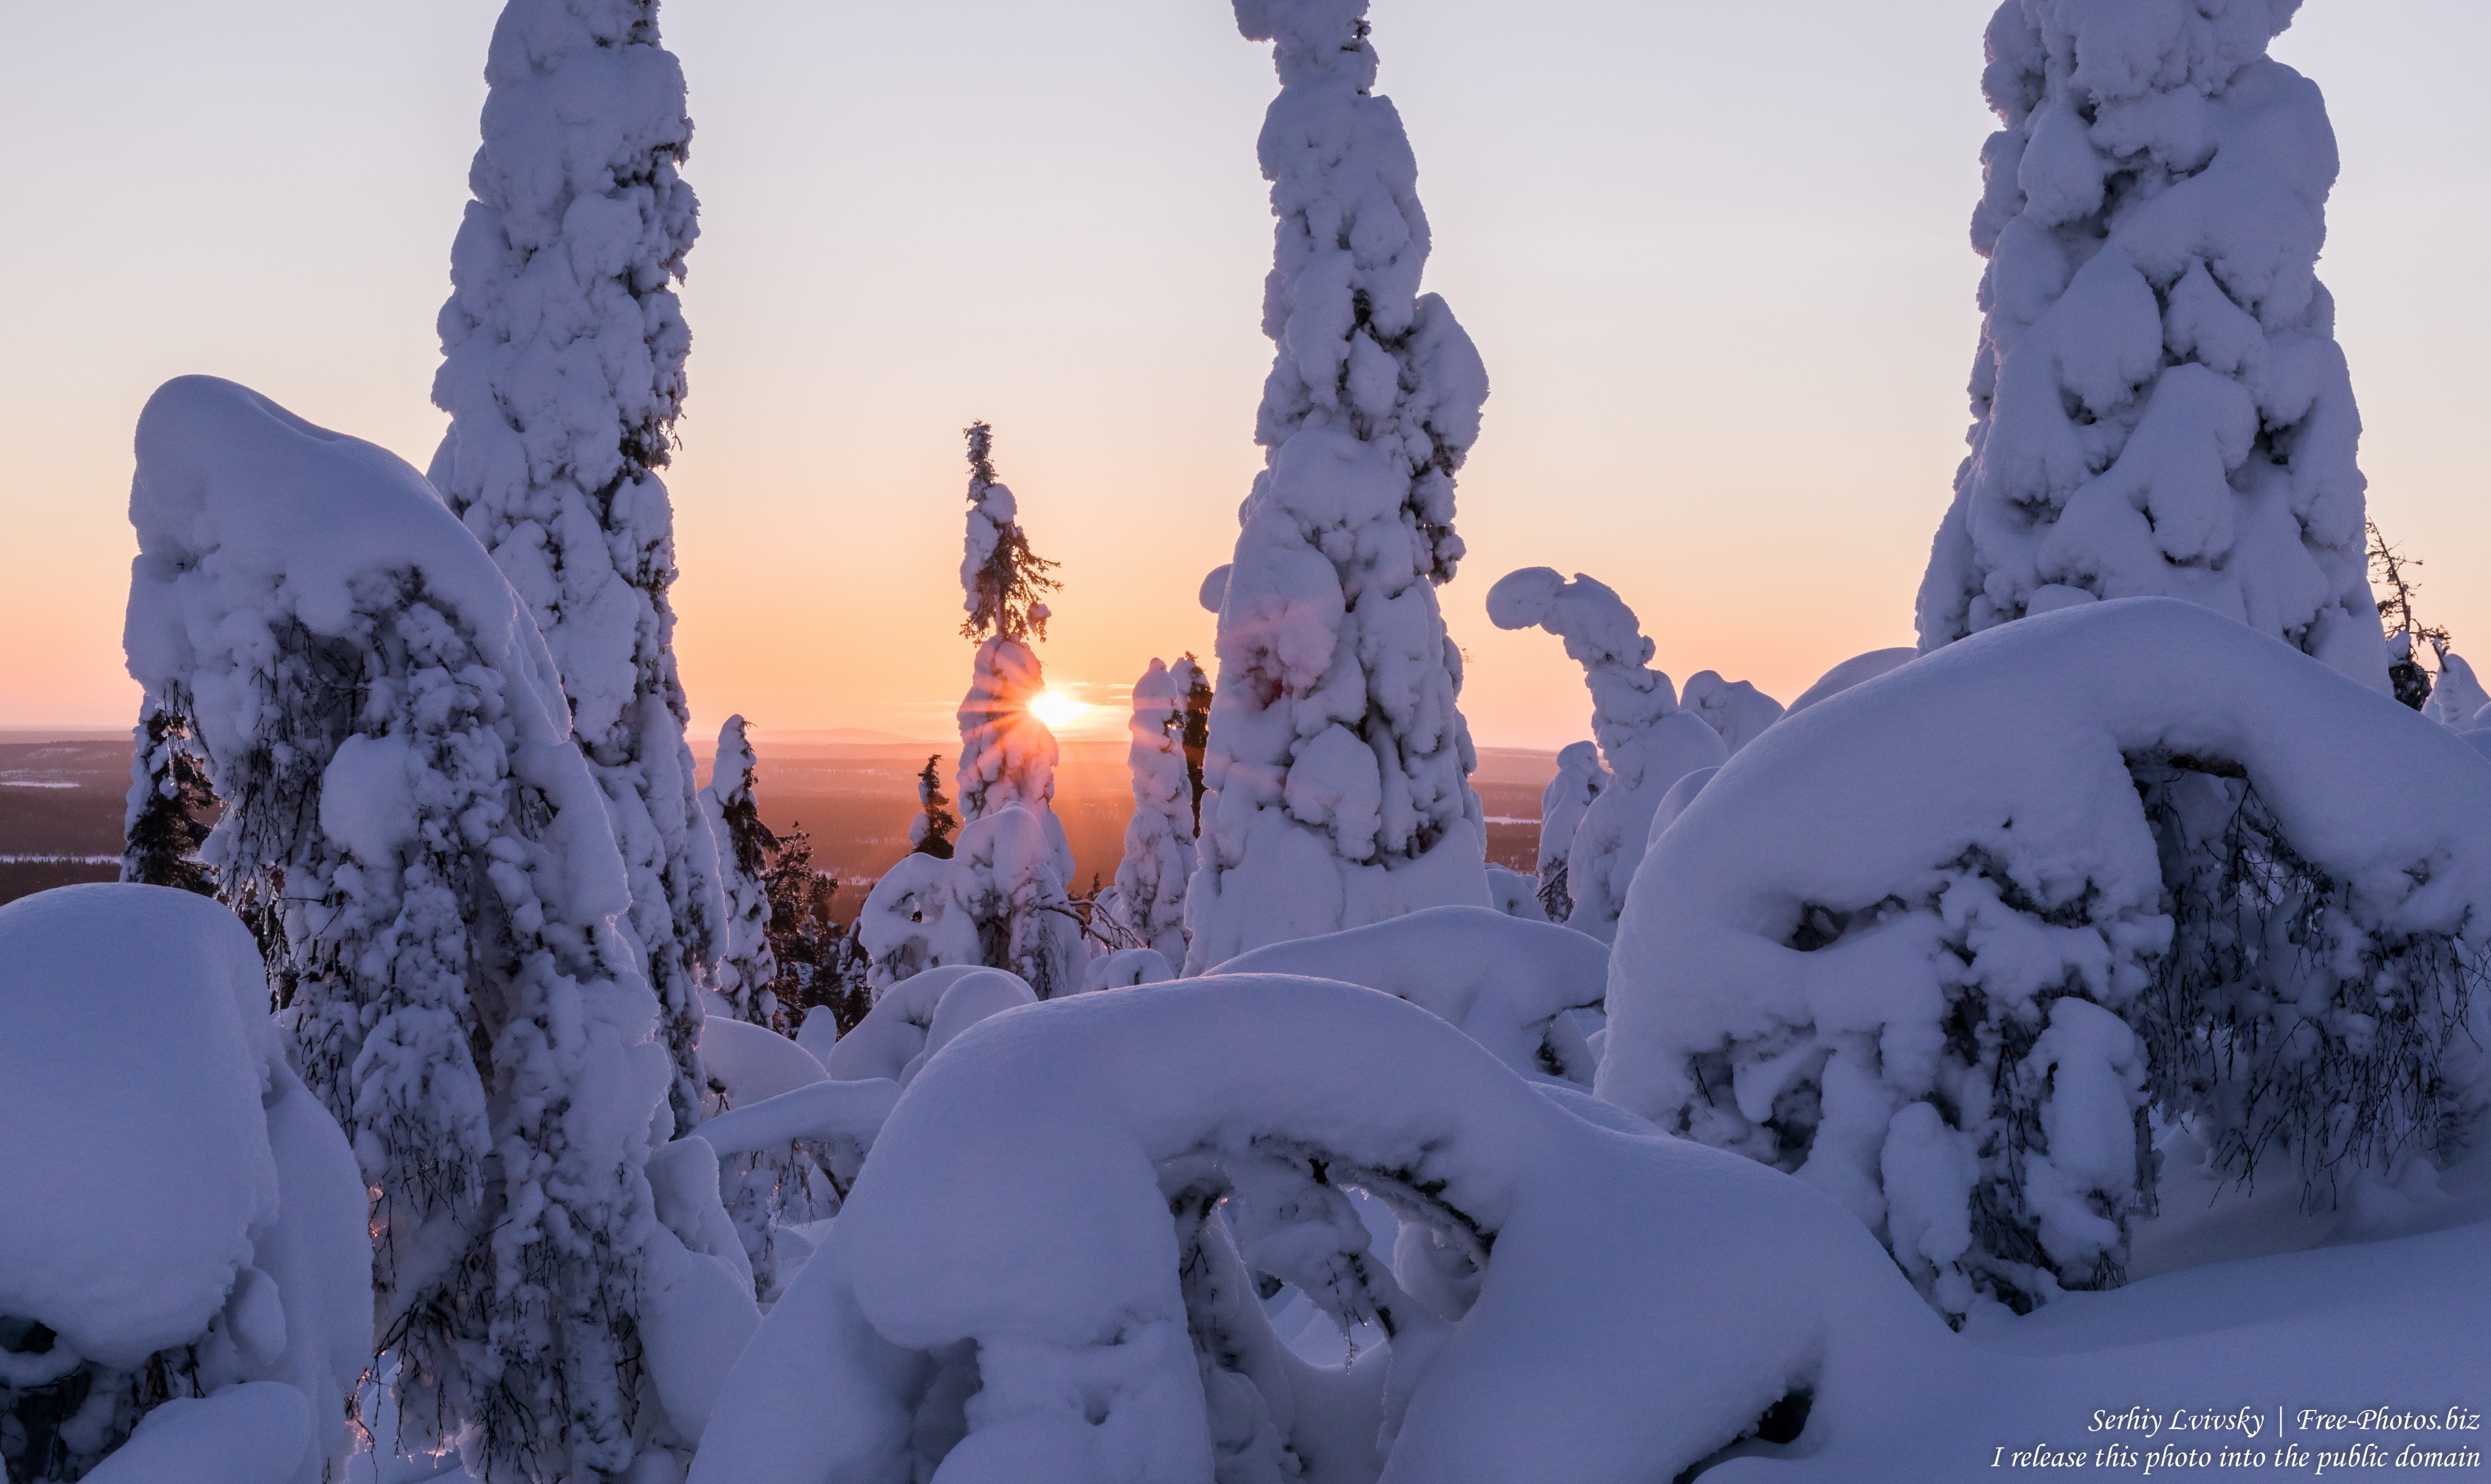 Valtavaara, Finland, photographed in January 2020 by Serhiy Lvivsky, picture 11